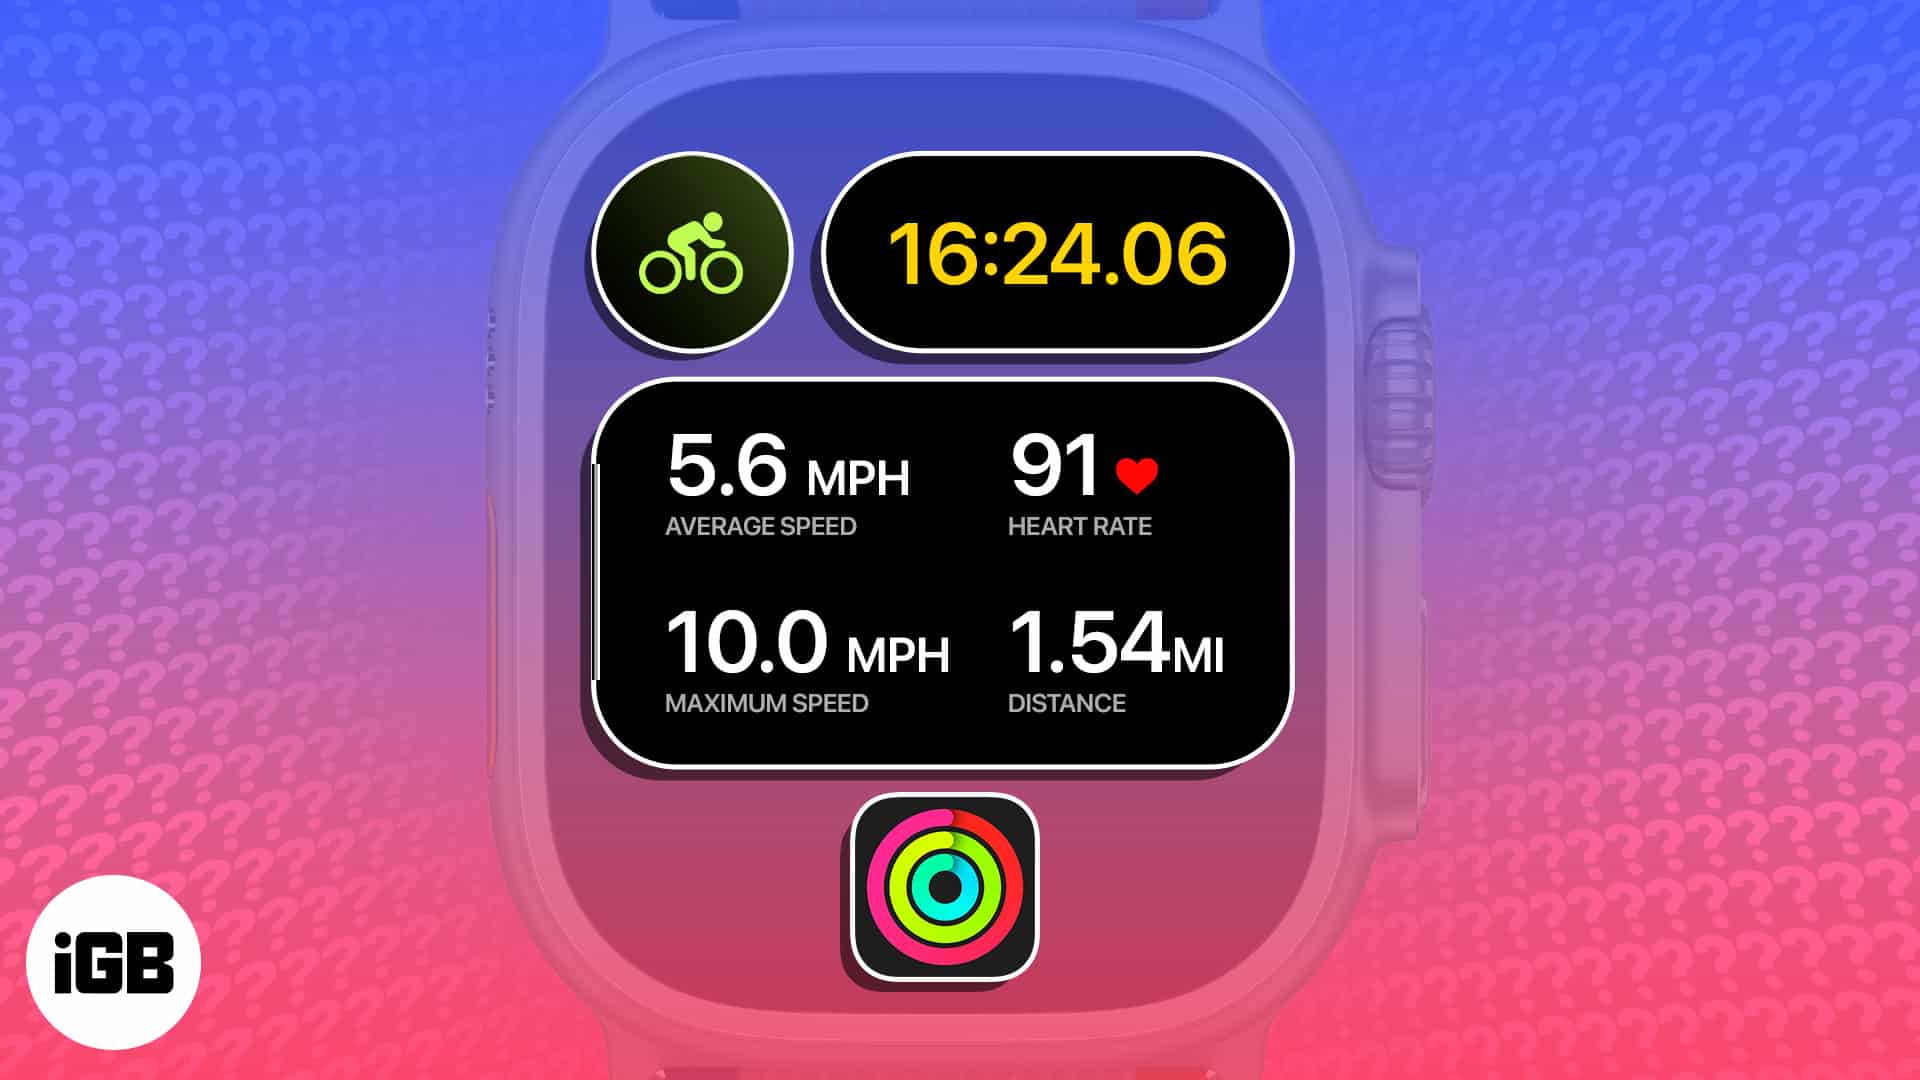 How to view Apple Watch live cycling metrics on iPhone